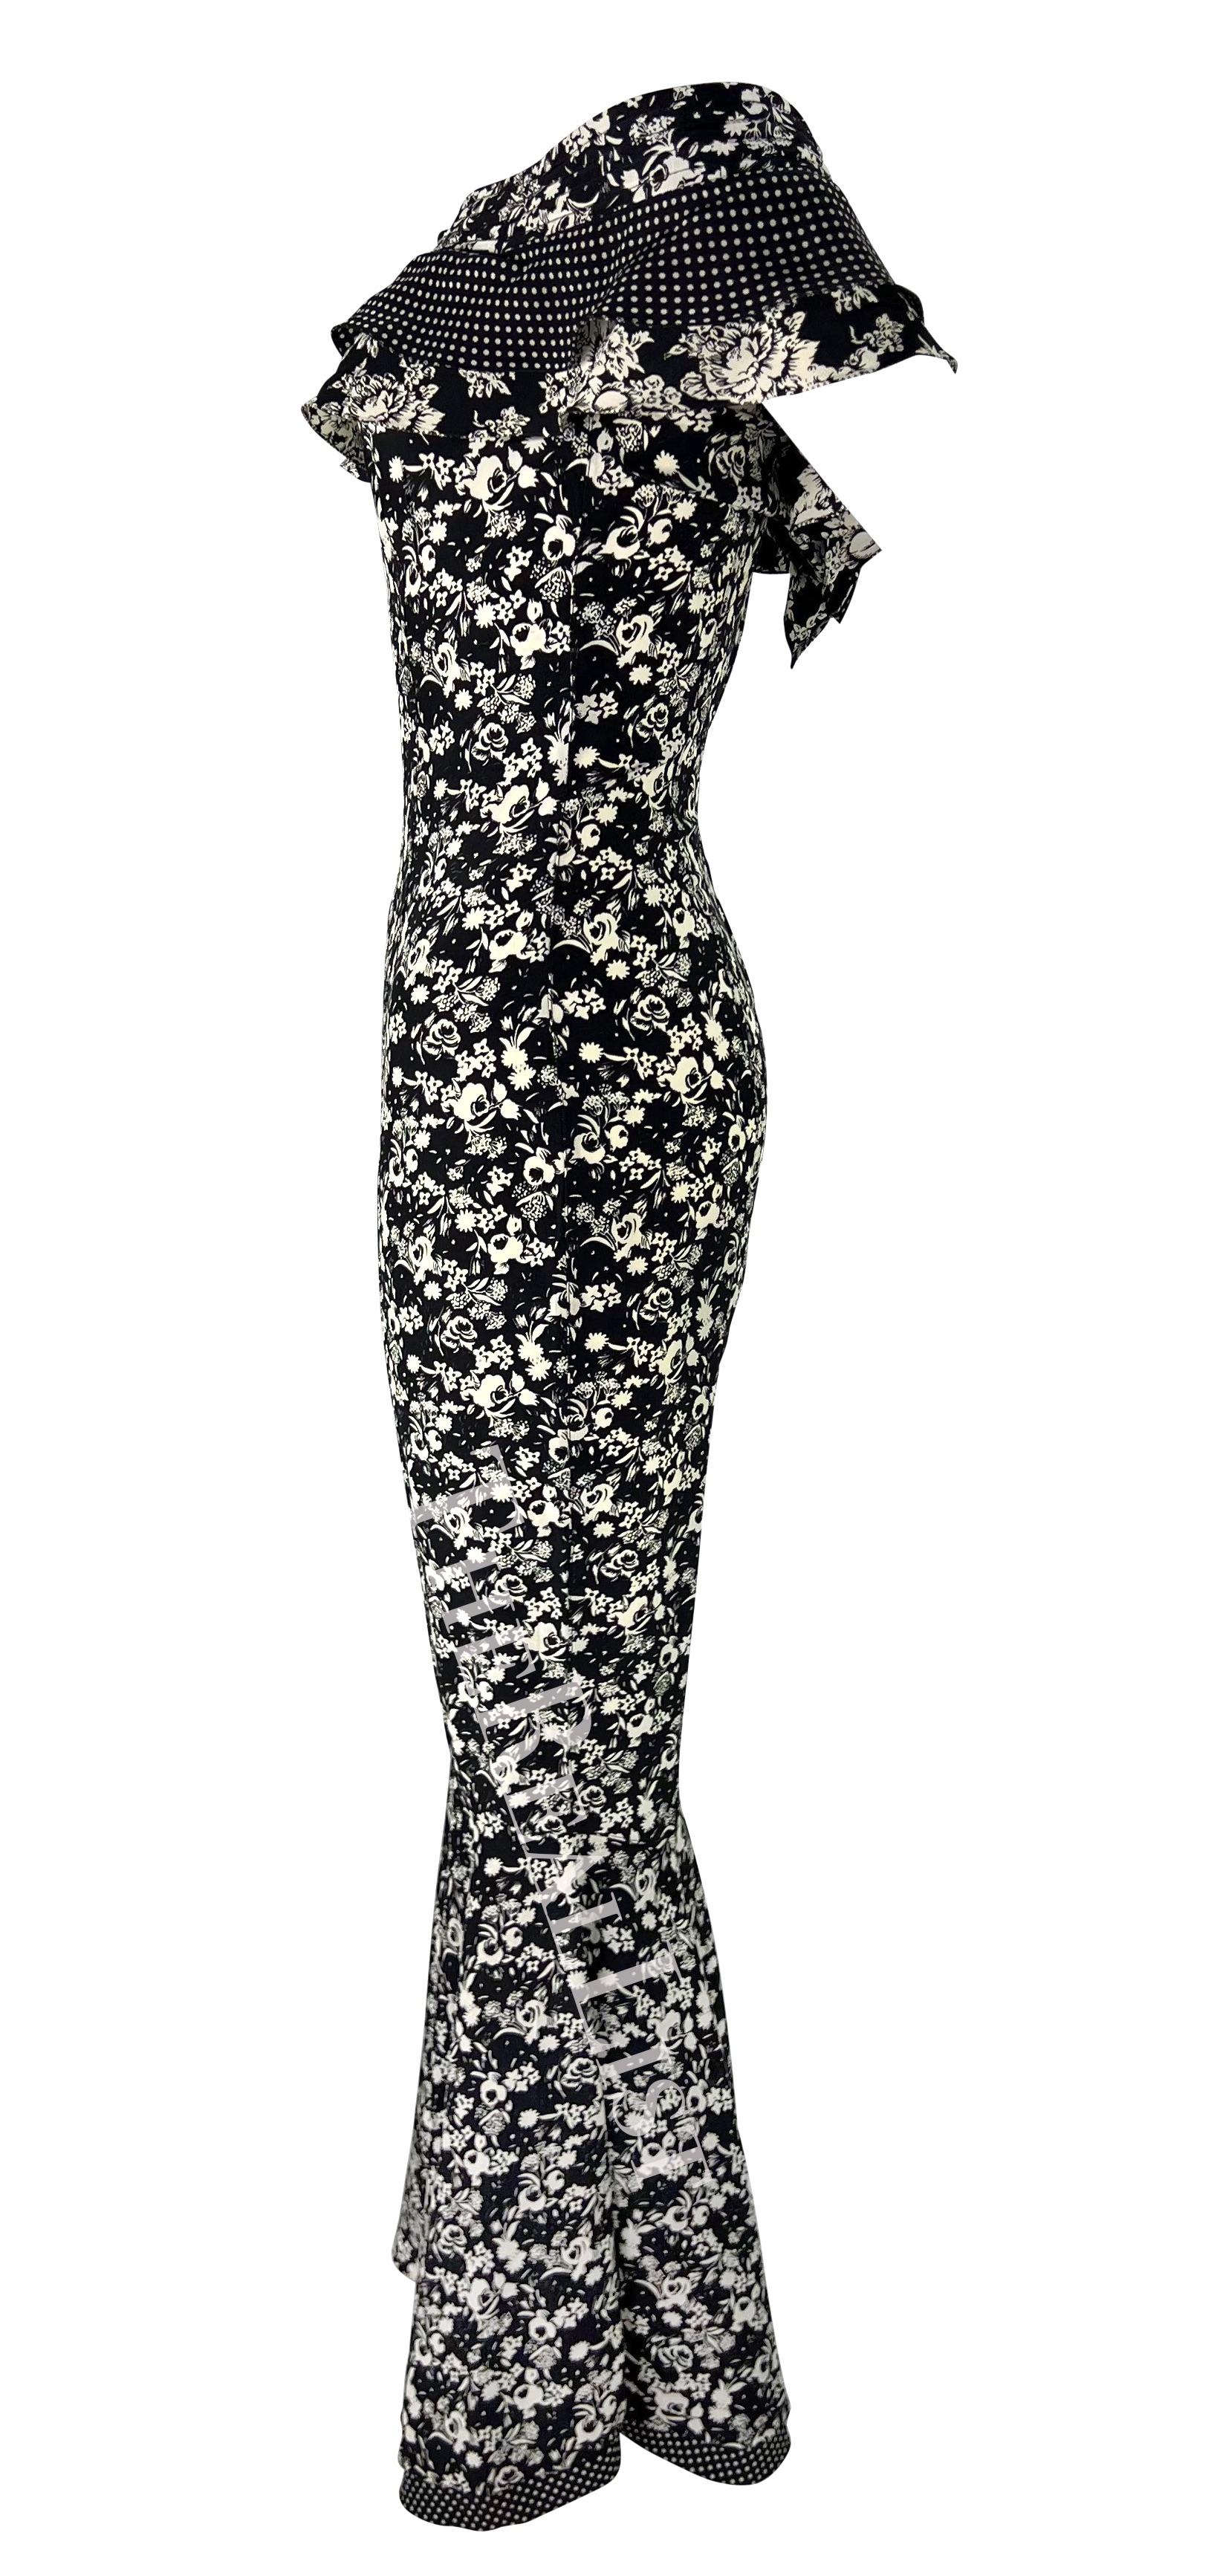 Women's S/S 1993 Gianni Versace Black White Floral Flared Bell-Bottom Catsuit For Sale